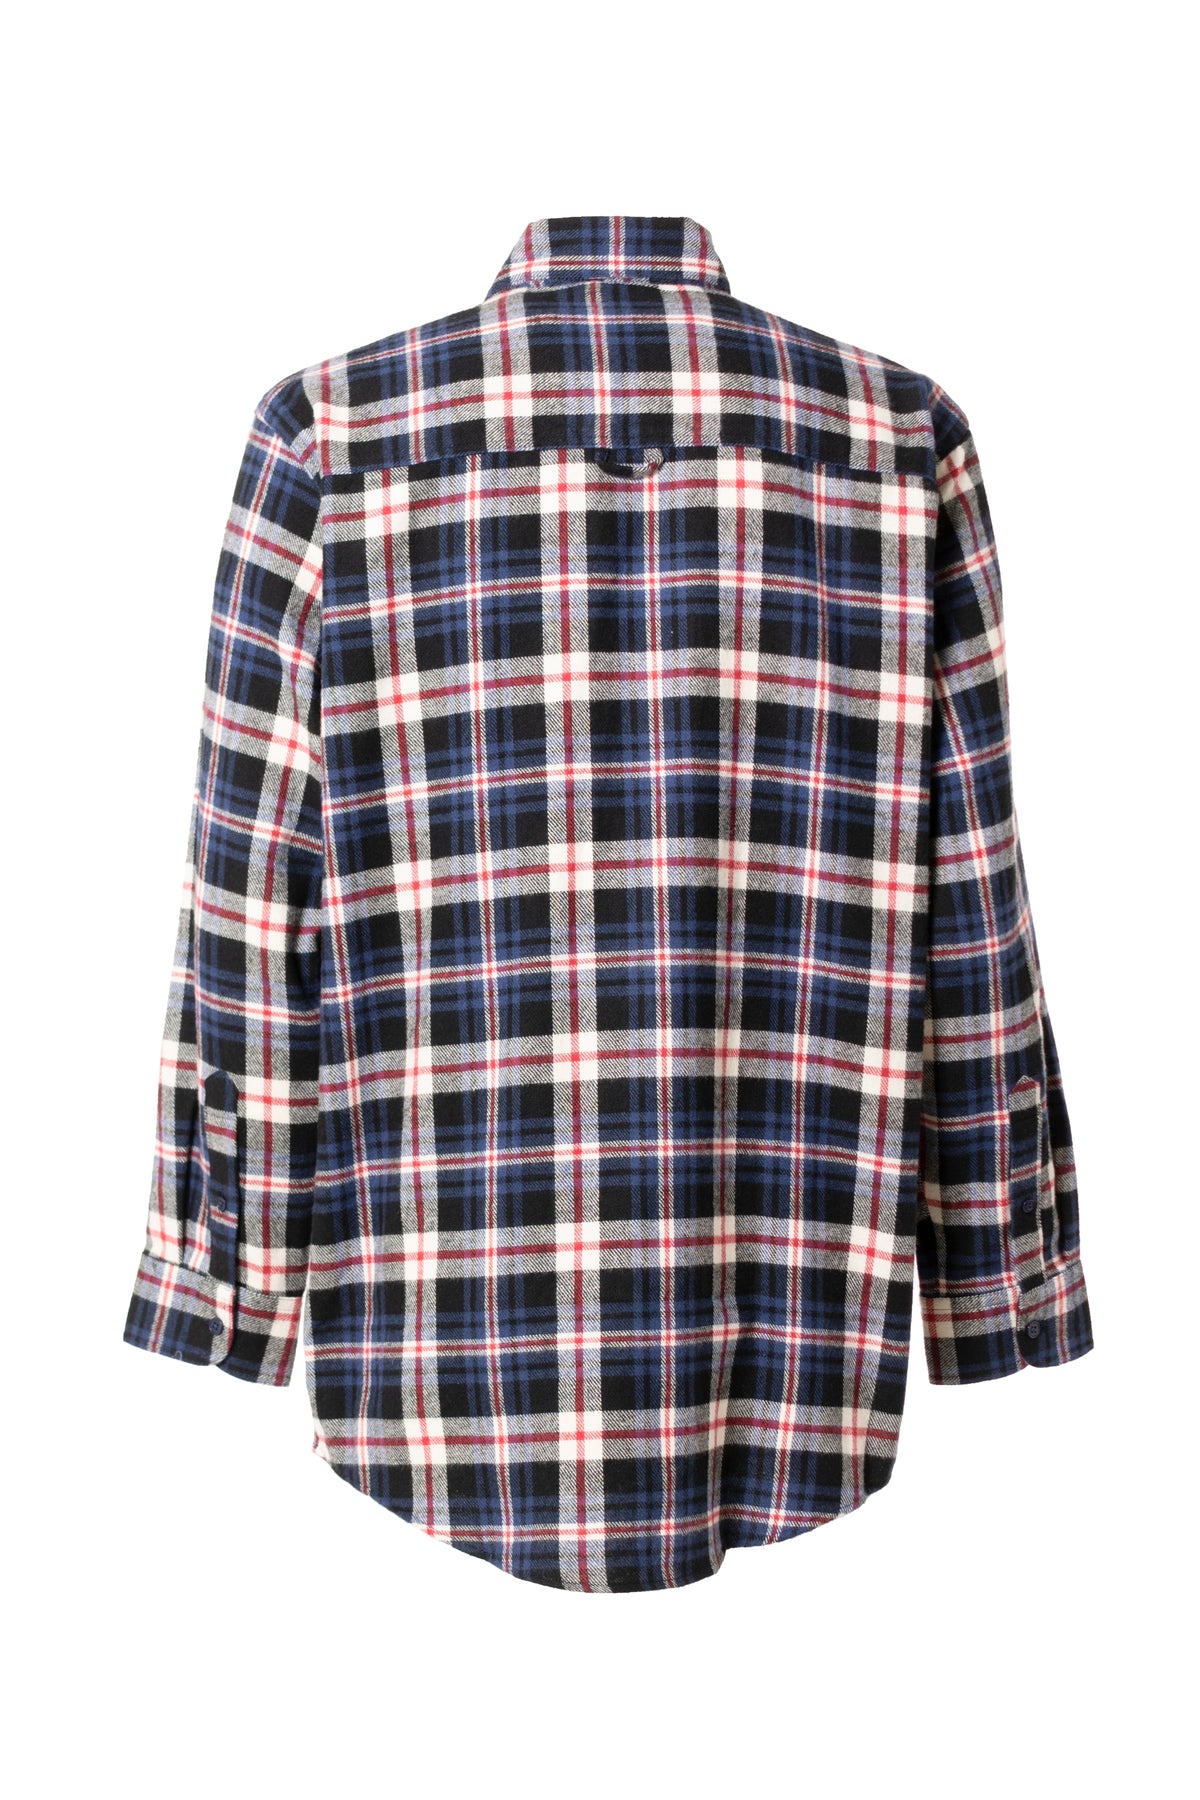 FLANNEL OVERSHIRT / RED NVY